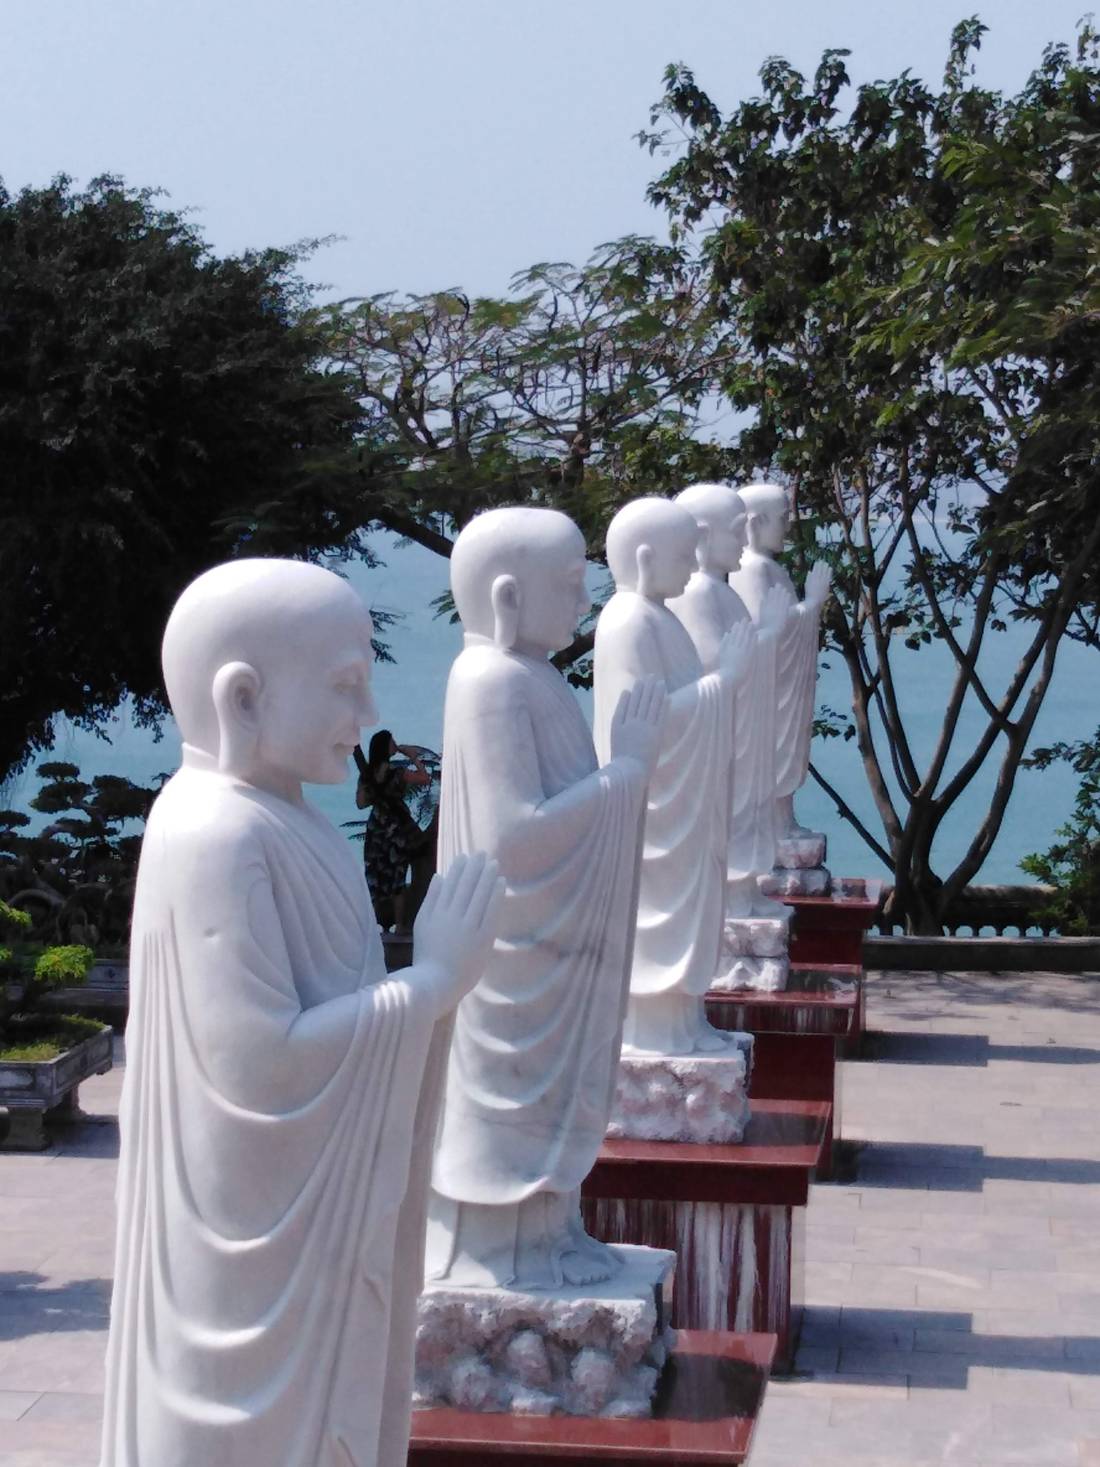 The white Buddhas and the blue sea 